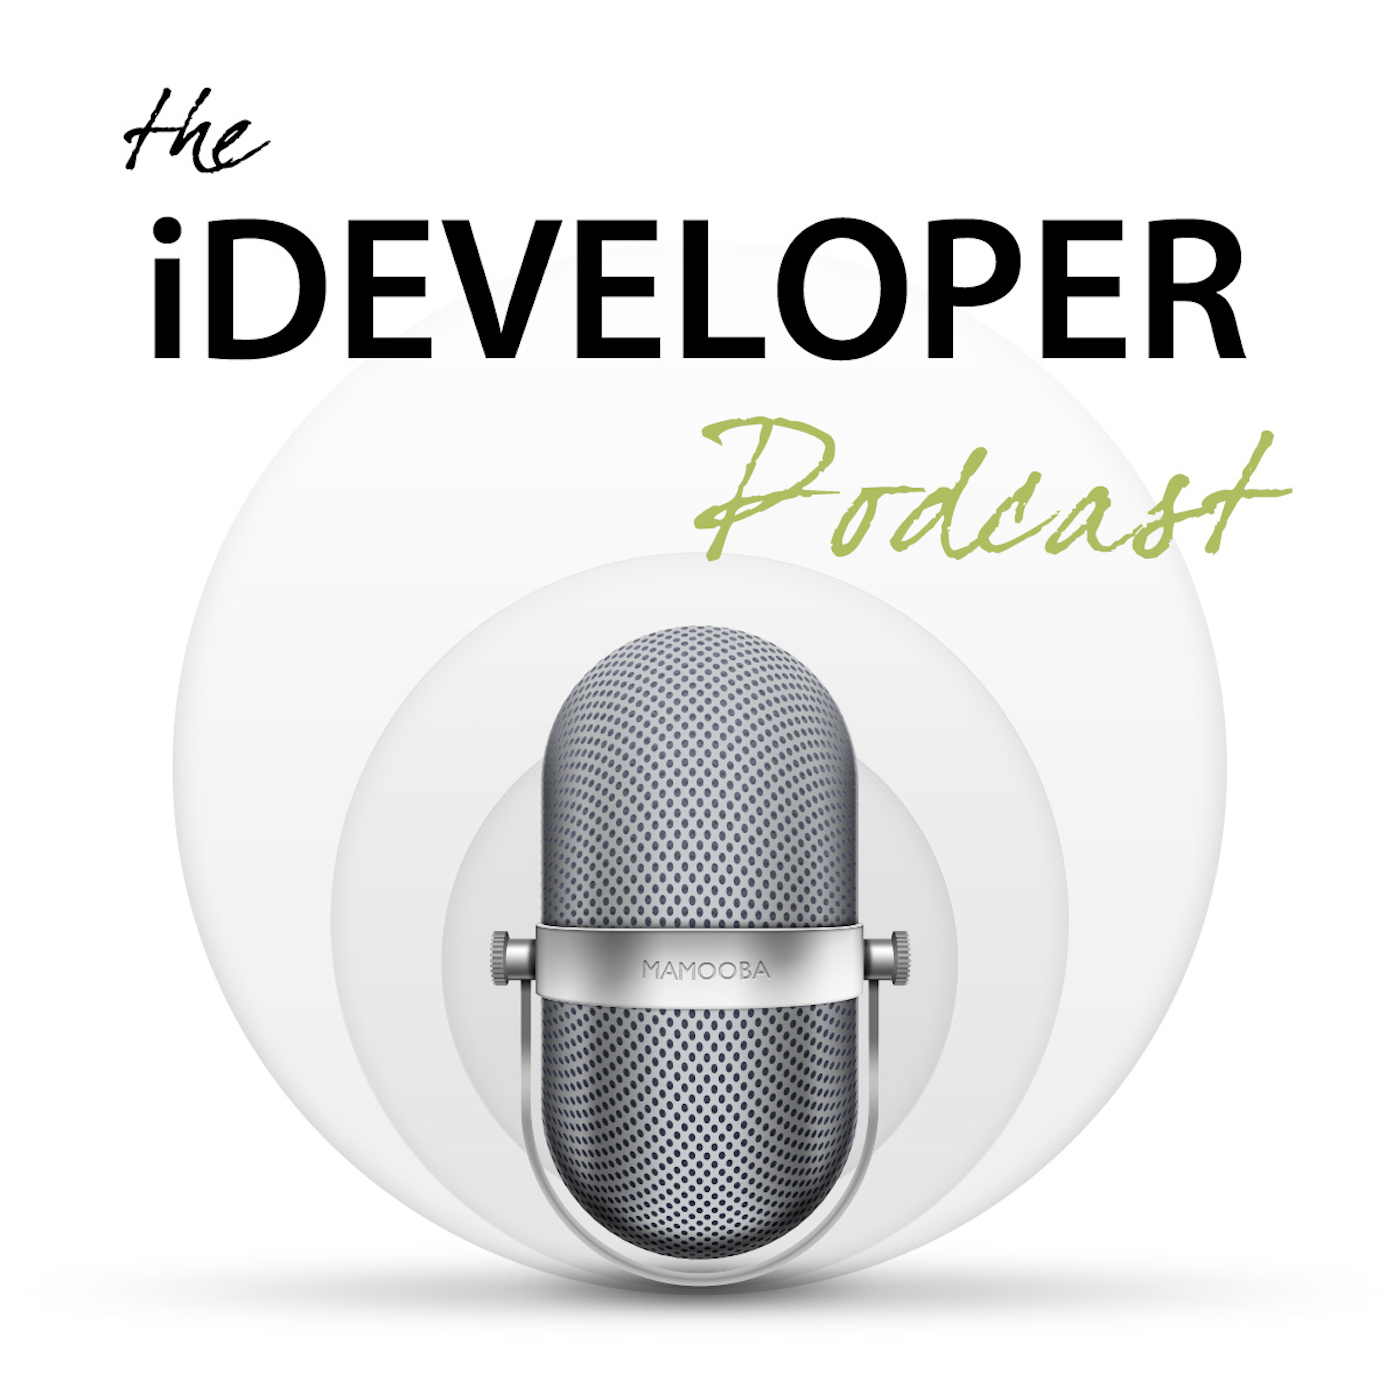 The iDeveloper Podcast 089: Helios and New Beginnings